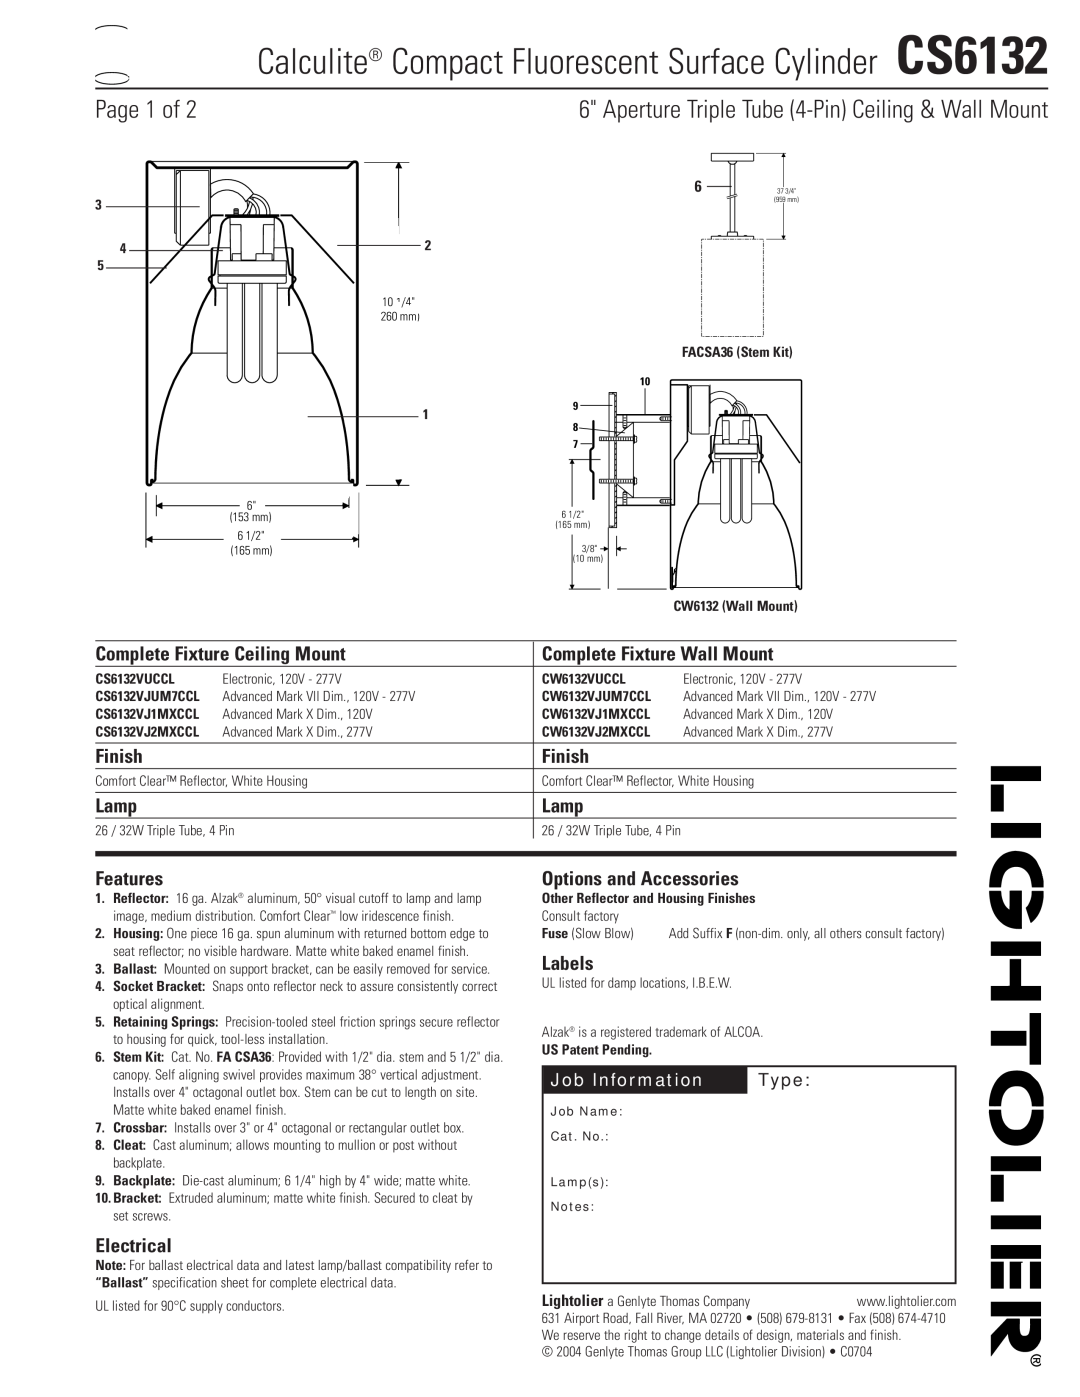 Lightolier CS6132 specifications Page 1 of, Aperture Triple Tube 4-PinCeiling & Wall Mount 